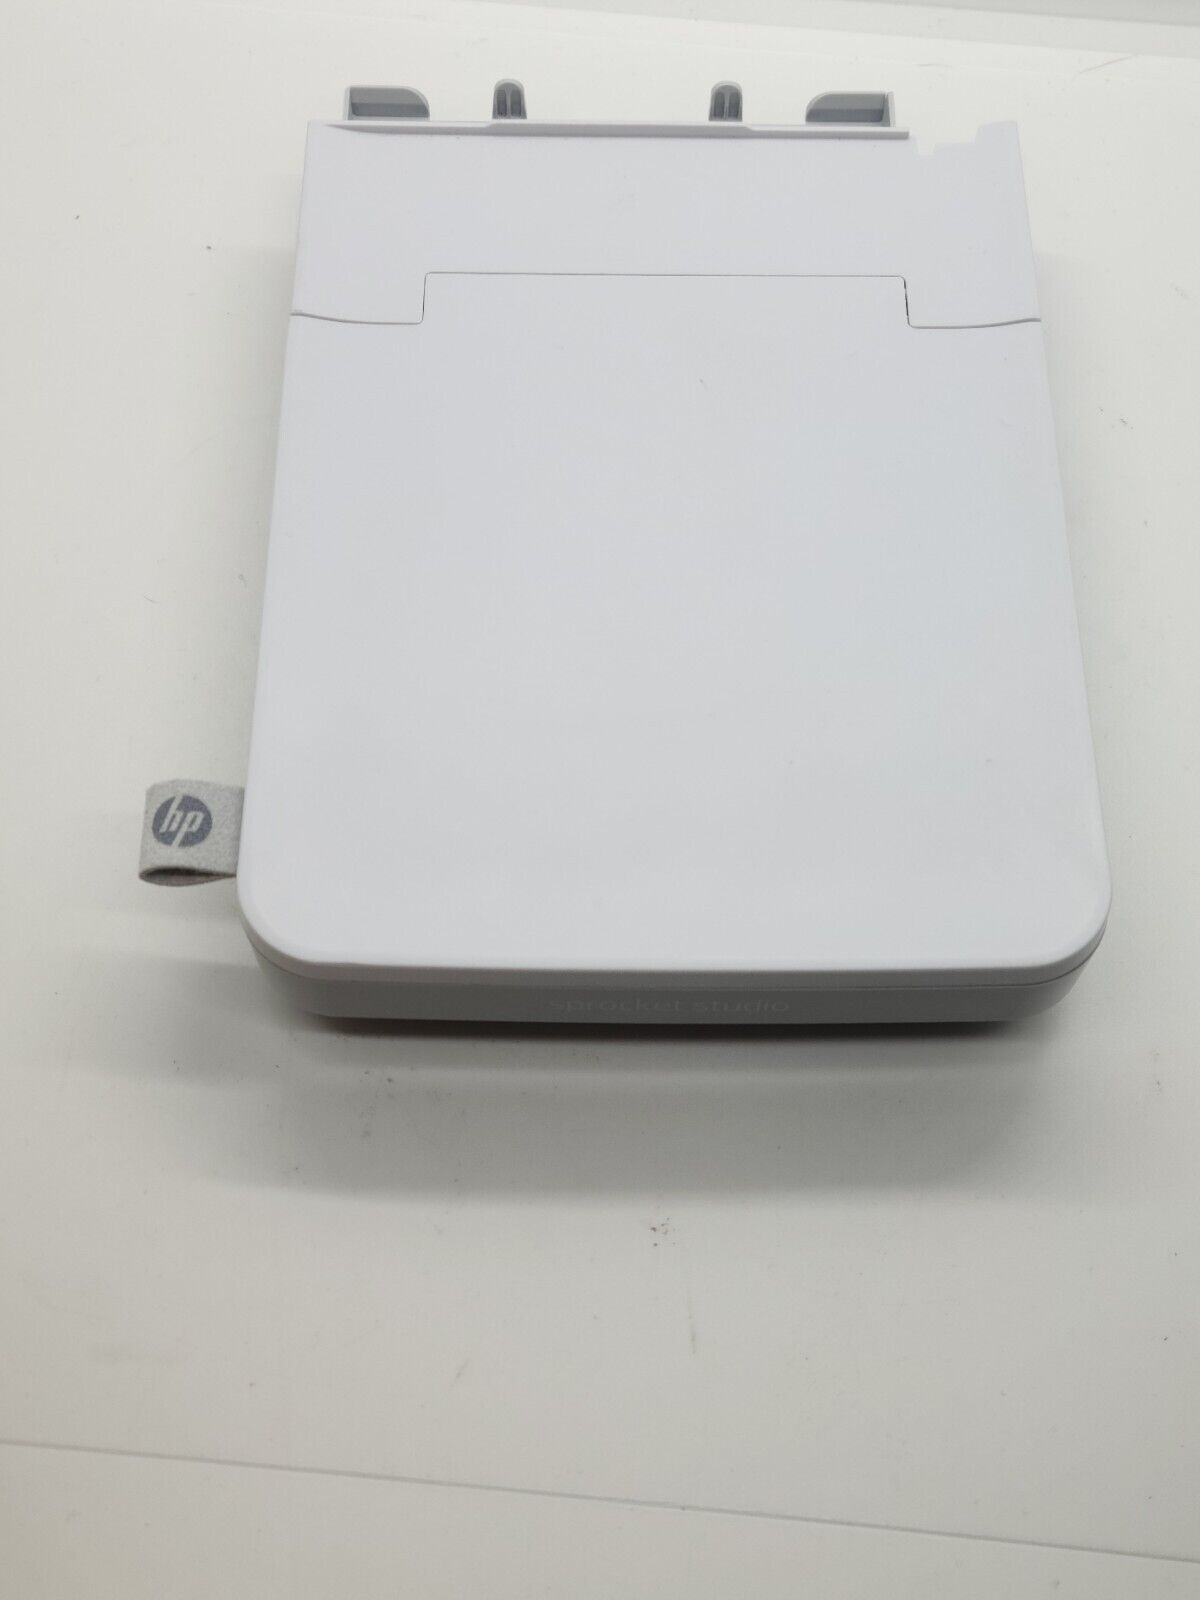 HP Sprocket Studio Printer Paper Tray Replacement Part (No Printer Included)